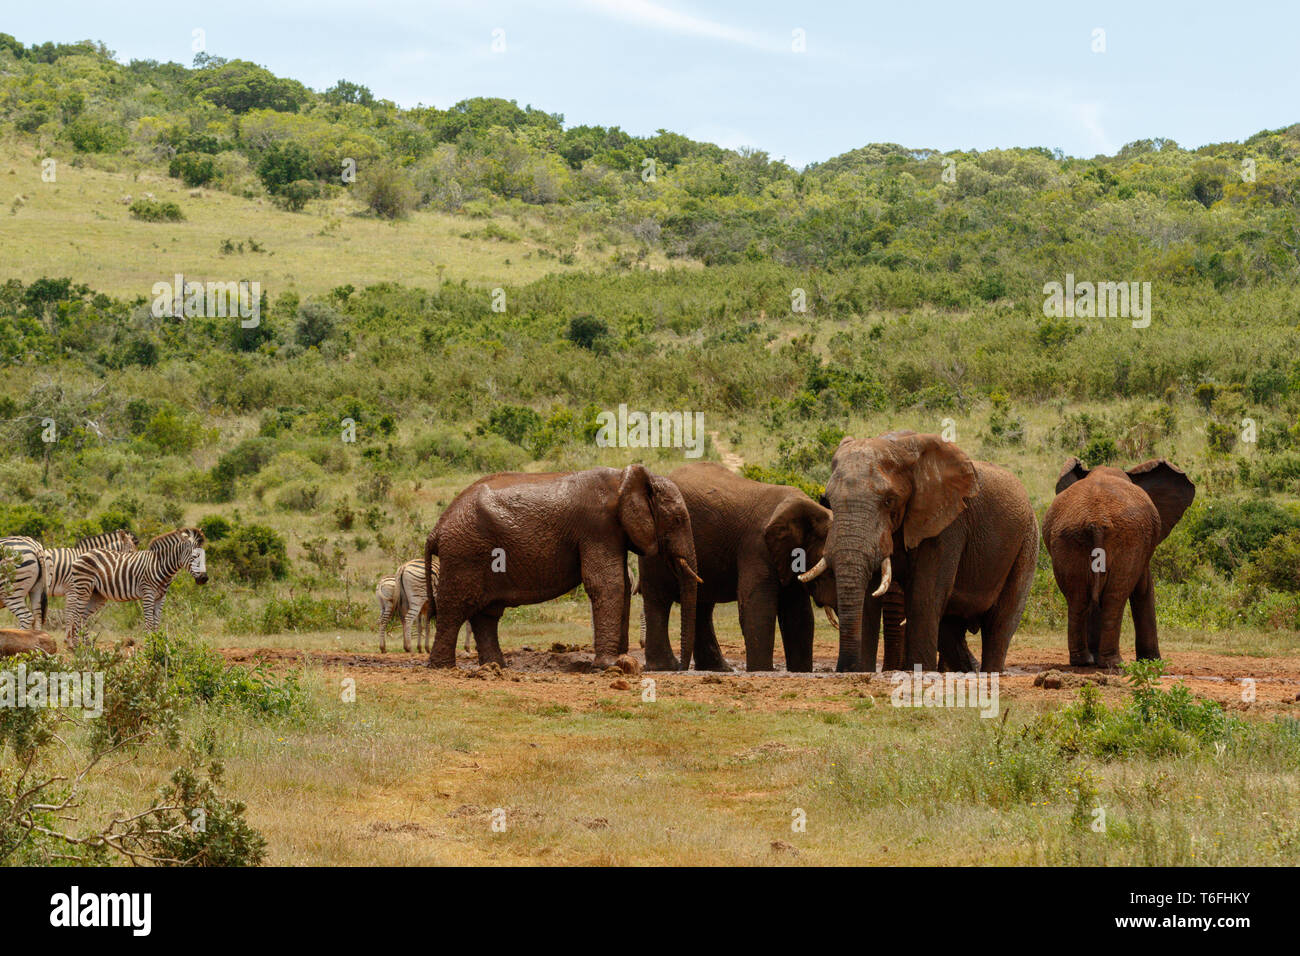 Elephants together at the drinking hole Stock Photo